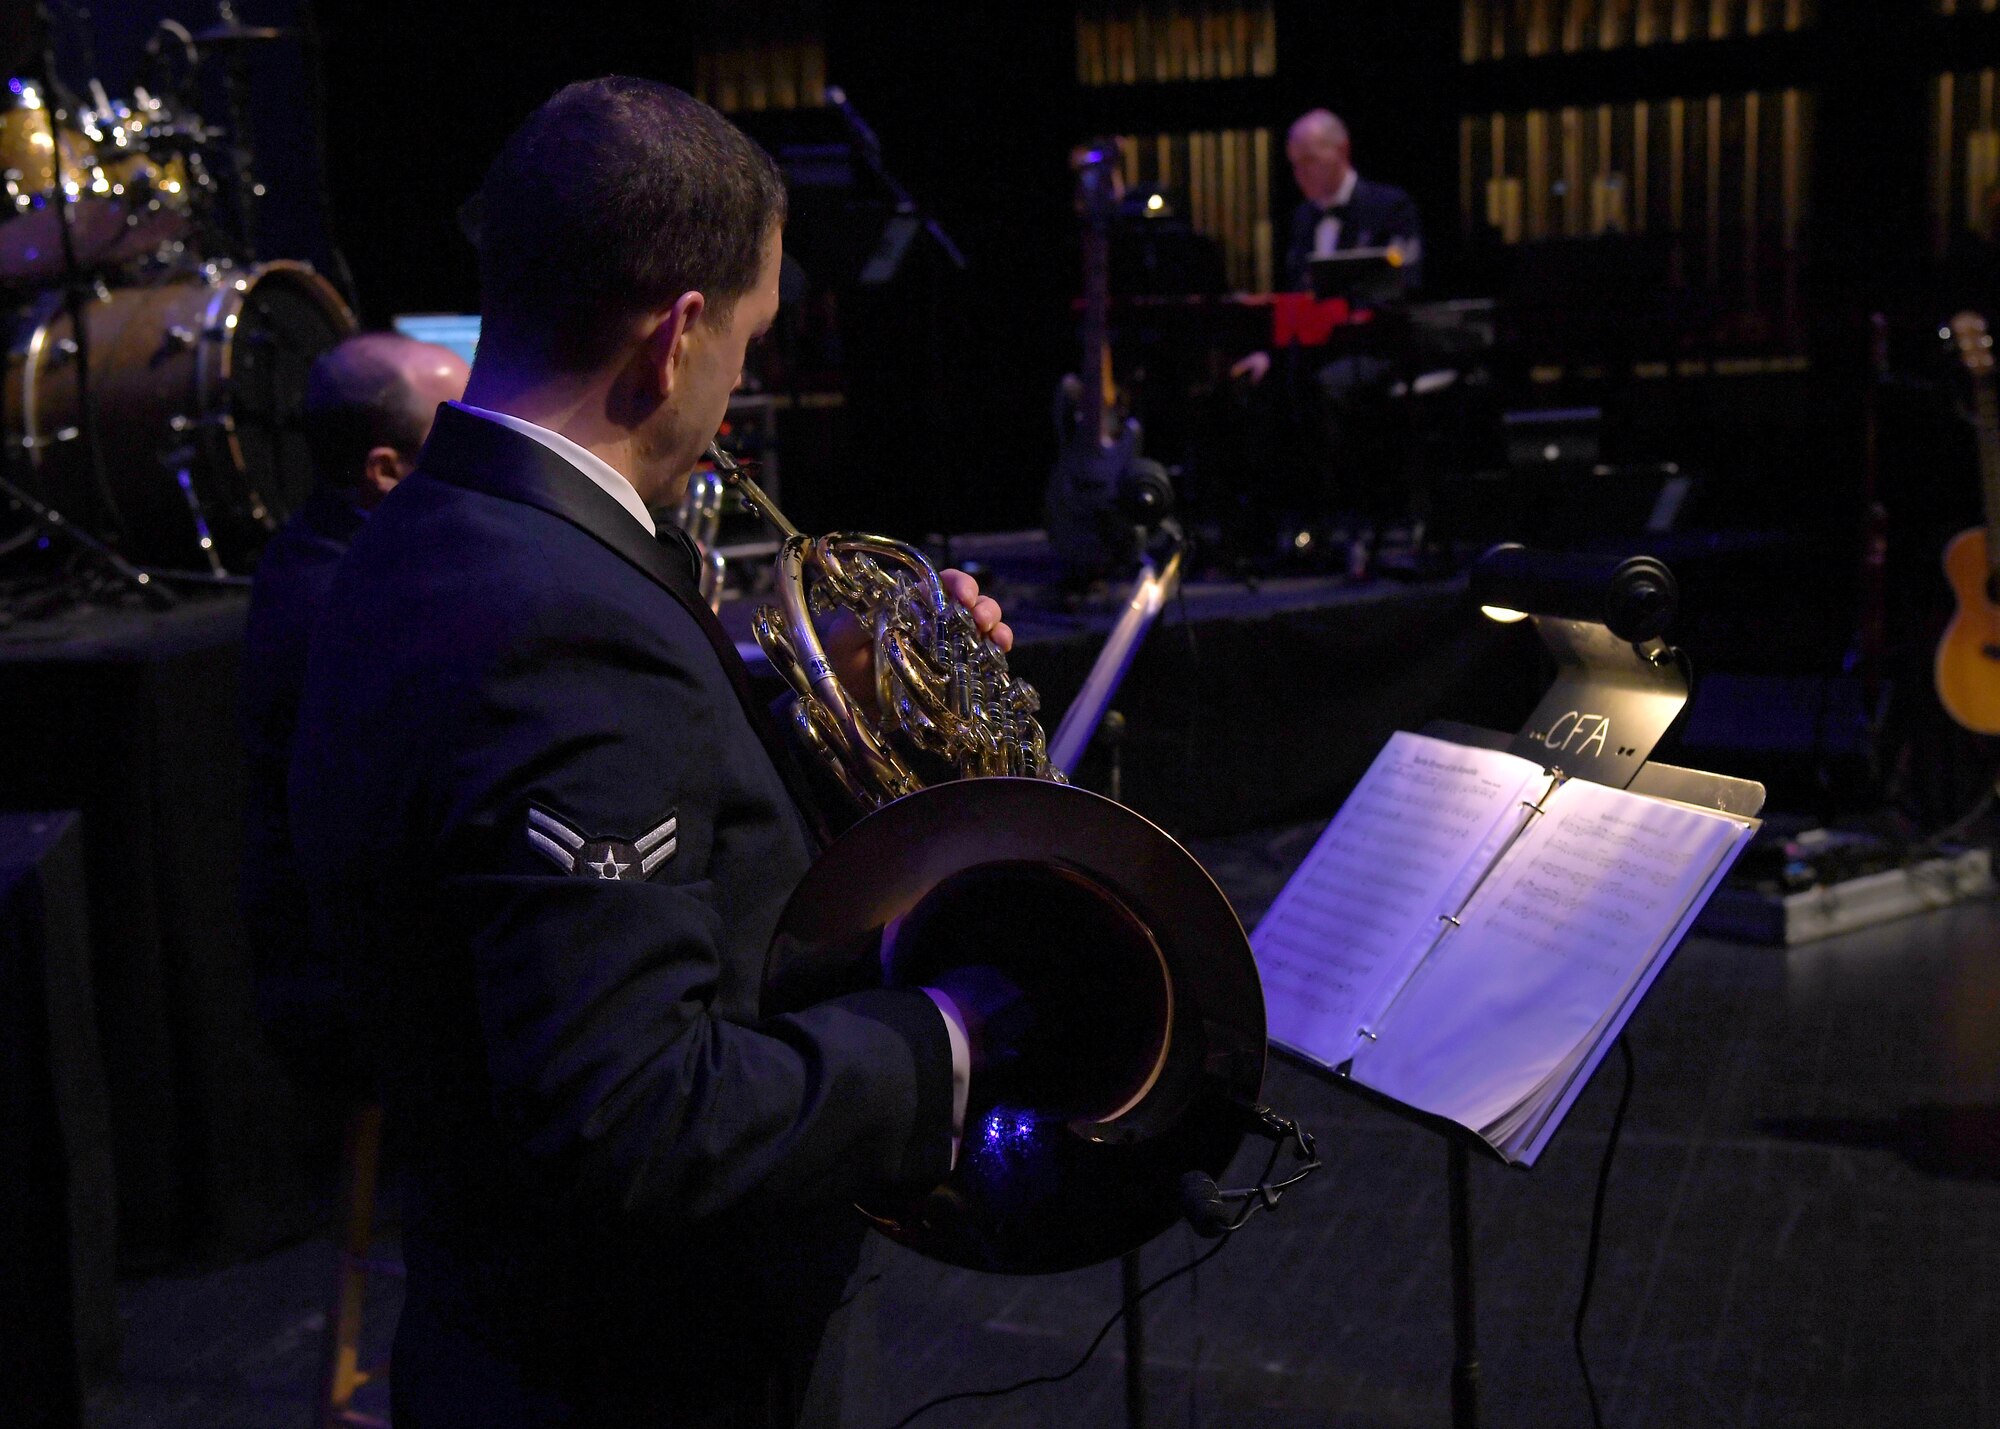 Airman 1st Class Jon Anderson, U.S. Air Force Heartland of America Band French horn player, follows a score as he plays his instrument during a concert at the Chester Fritz Auditorium November 6, 2018, in Grand Forks, North Dakota. The concert was a special veterans Day performance which included a variety of tributes and American classics to include “Amazing Grace,” “America the Beautiful,” and “God Bless America.” (U.S. Air Force photo by Airman 1st Class Elora J. Martinez)